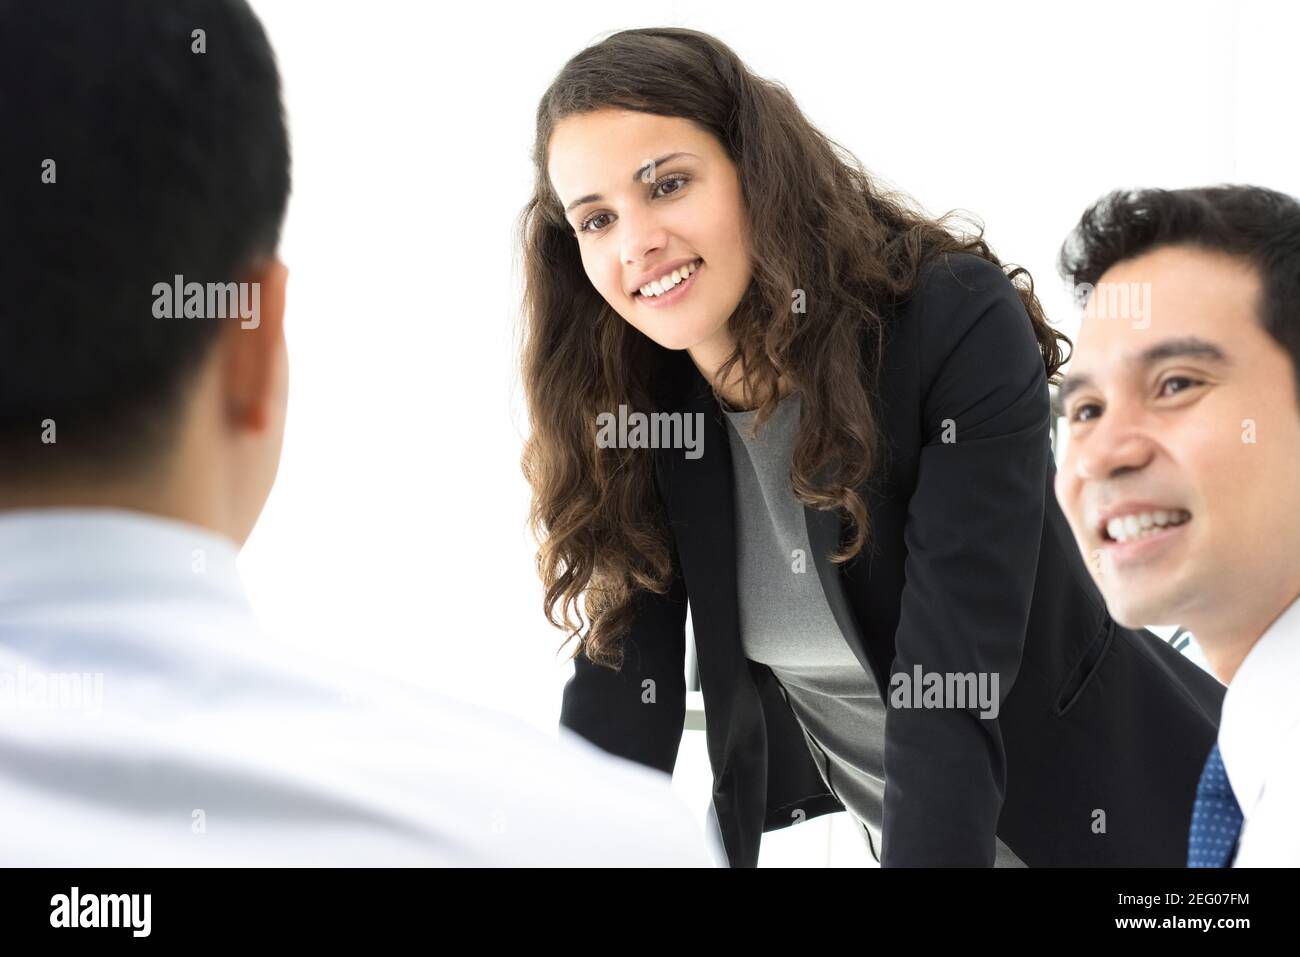 Female leader paying attention to her colleague at the meeting Stock Photo